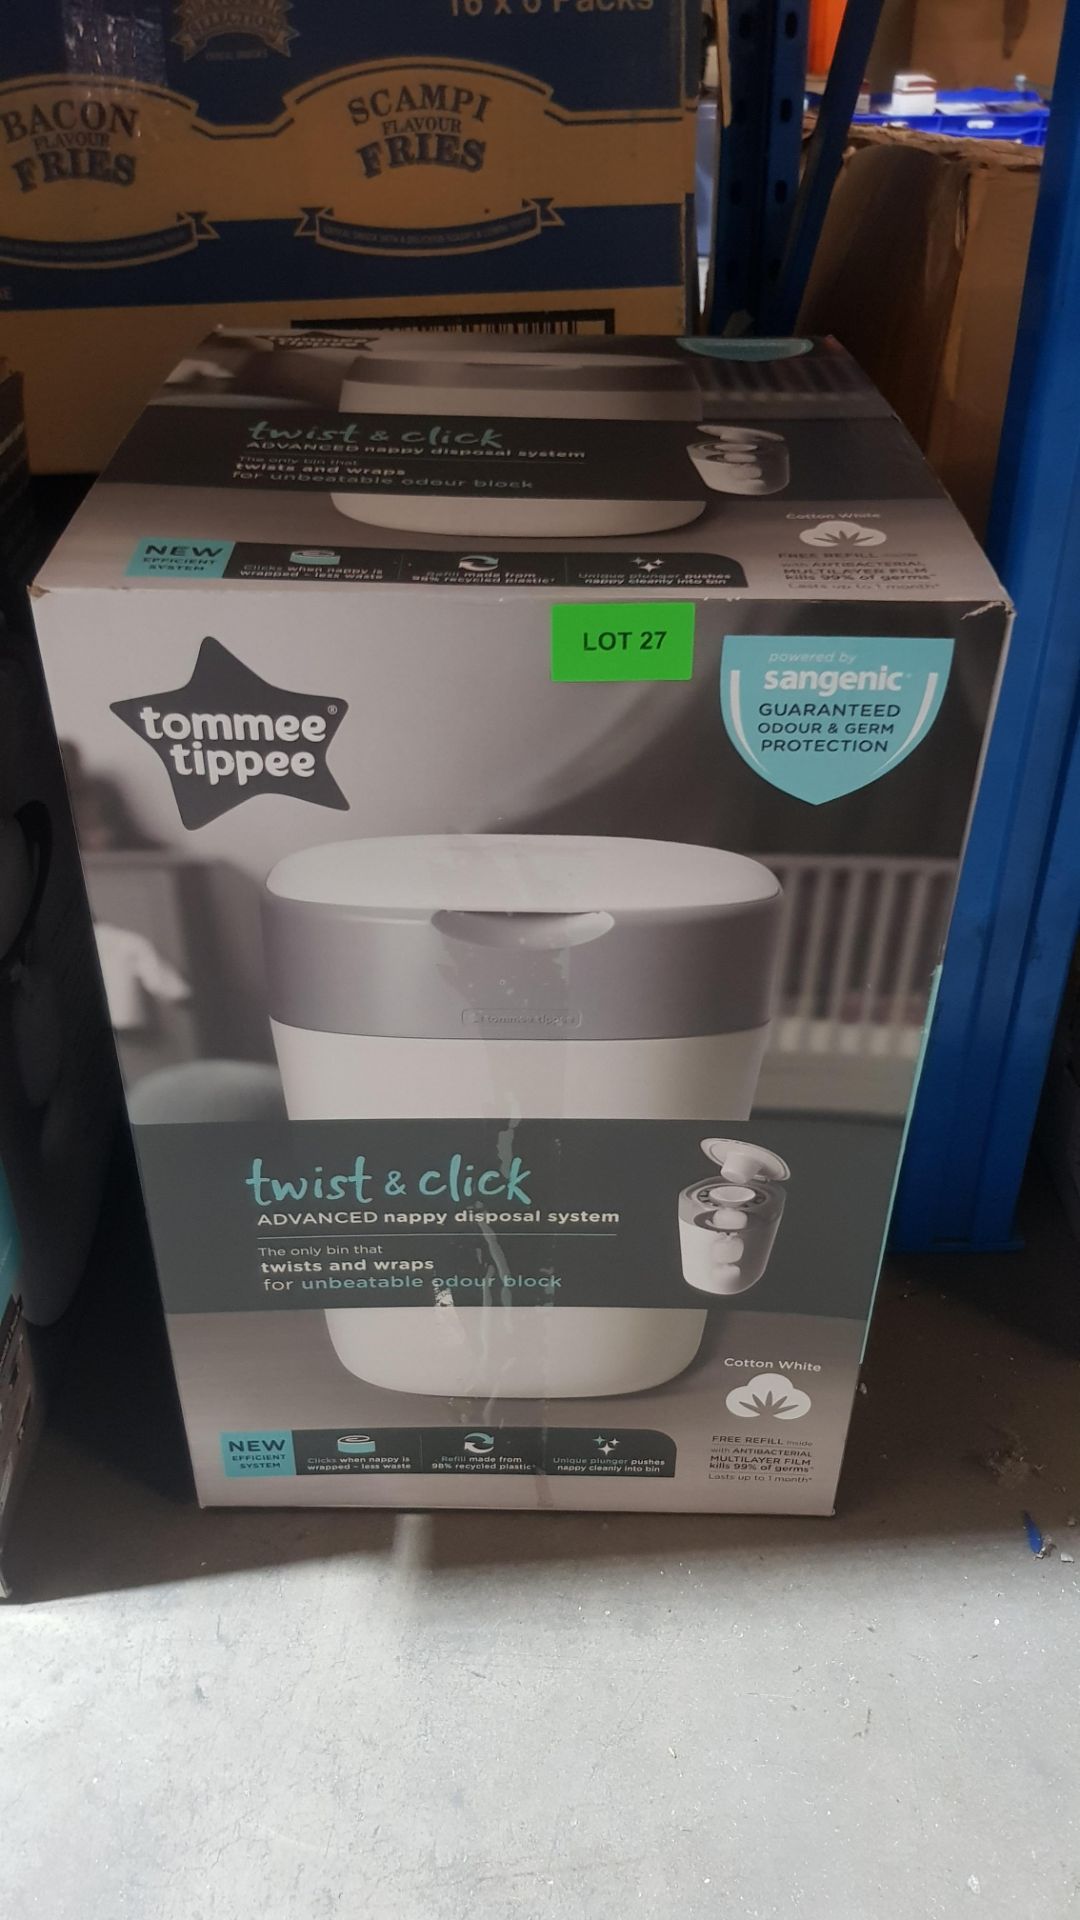 (R6B) Baby. 1 X Tommee Tippee Twist & Click Advanced Nappy Disposal System. RRP £38 (New) - Image 2 of 2